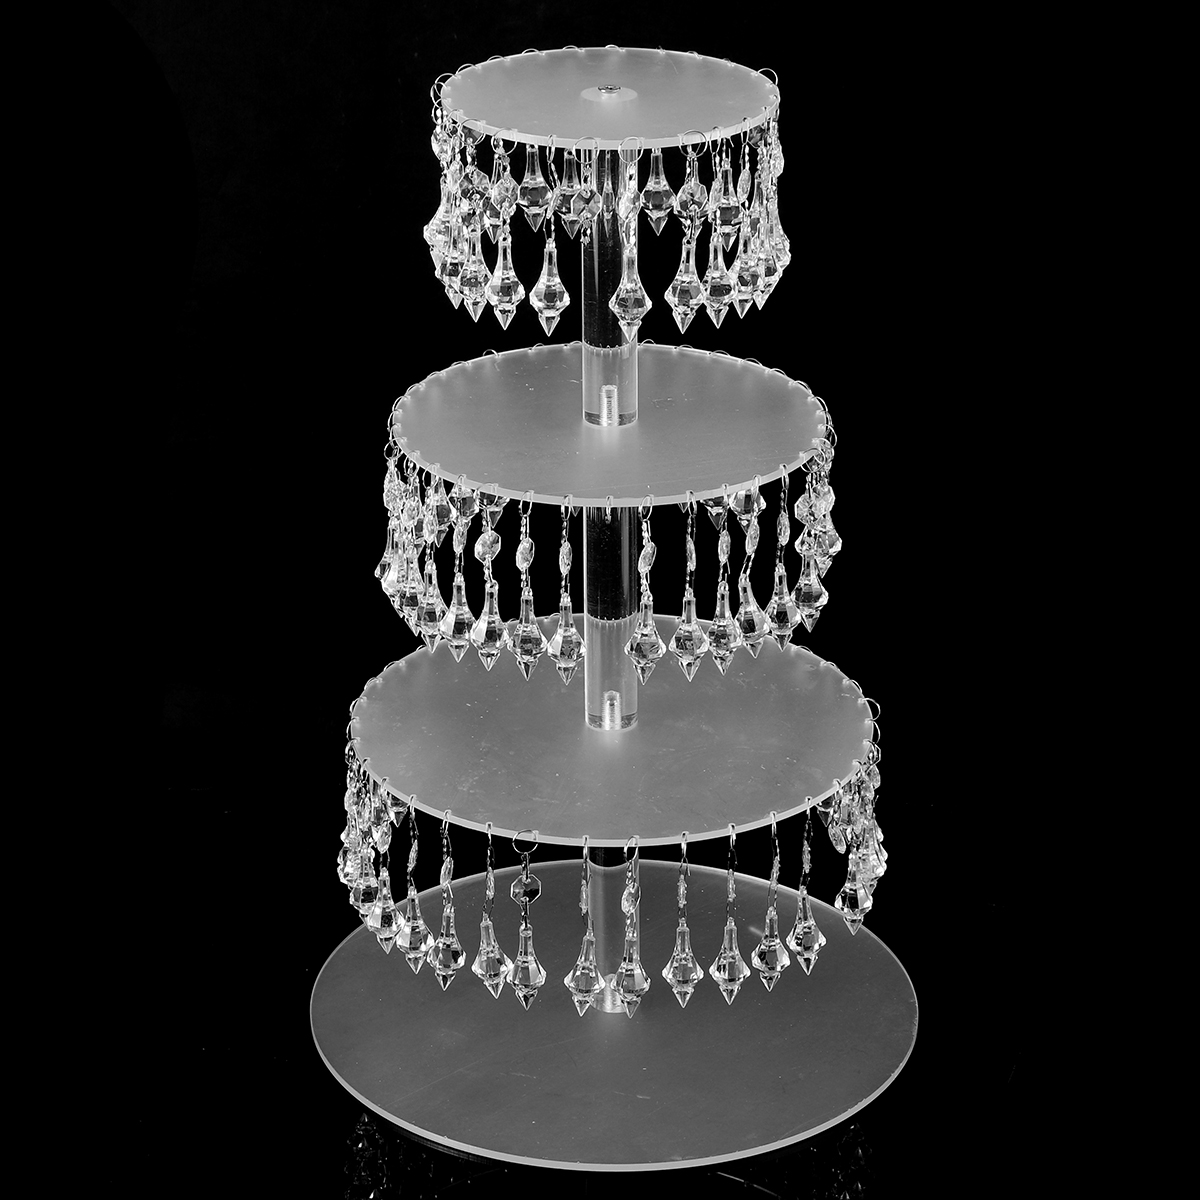 4-Layer-Acrylic-Cake-Stand-Remote-Control-LED-Light-Cupcake-Party-Display-Rack-1828525-7